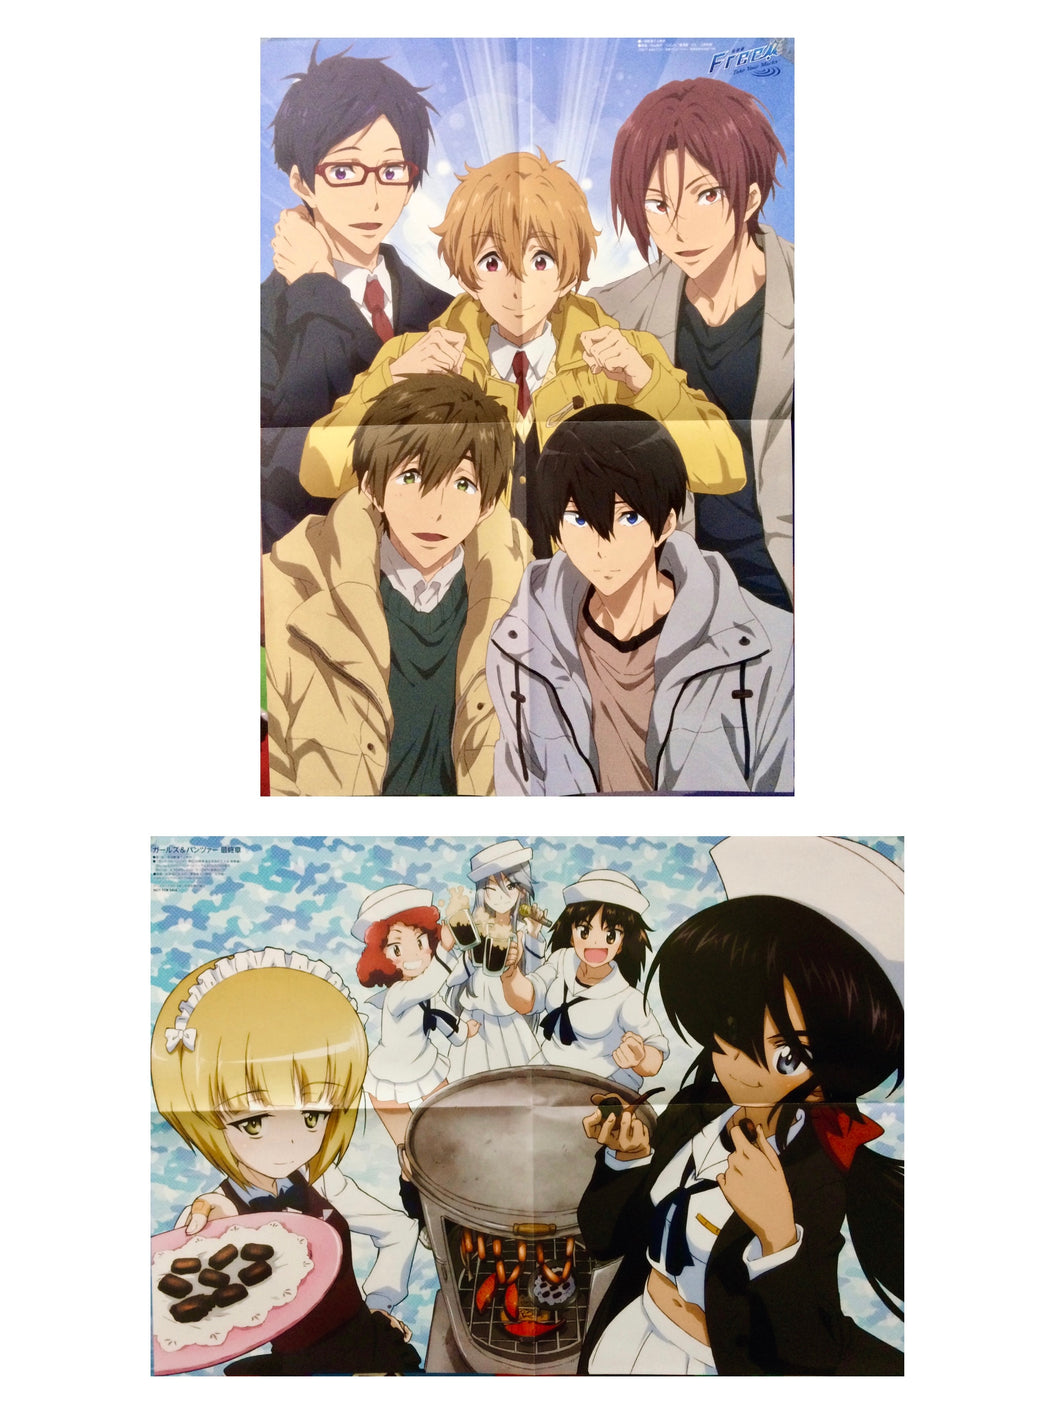 Girls und Panzer Final Chapter (Shark Team) / Free! Take Your Marks - Double-sided B3 Poster - Monthly Newtype Appendix